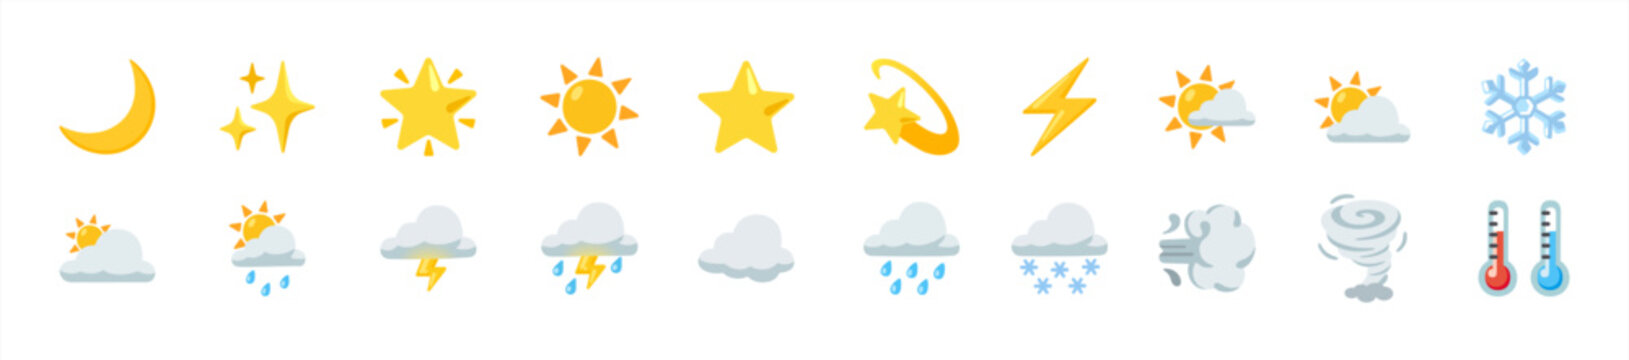 20 weather icons on white background, vector 10 eps.